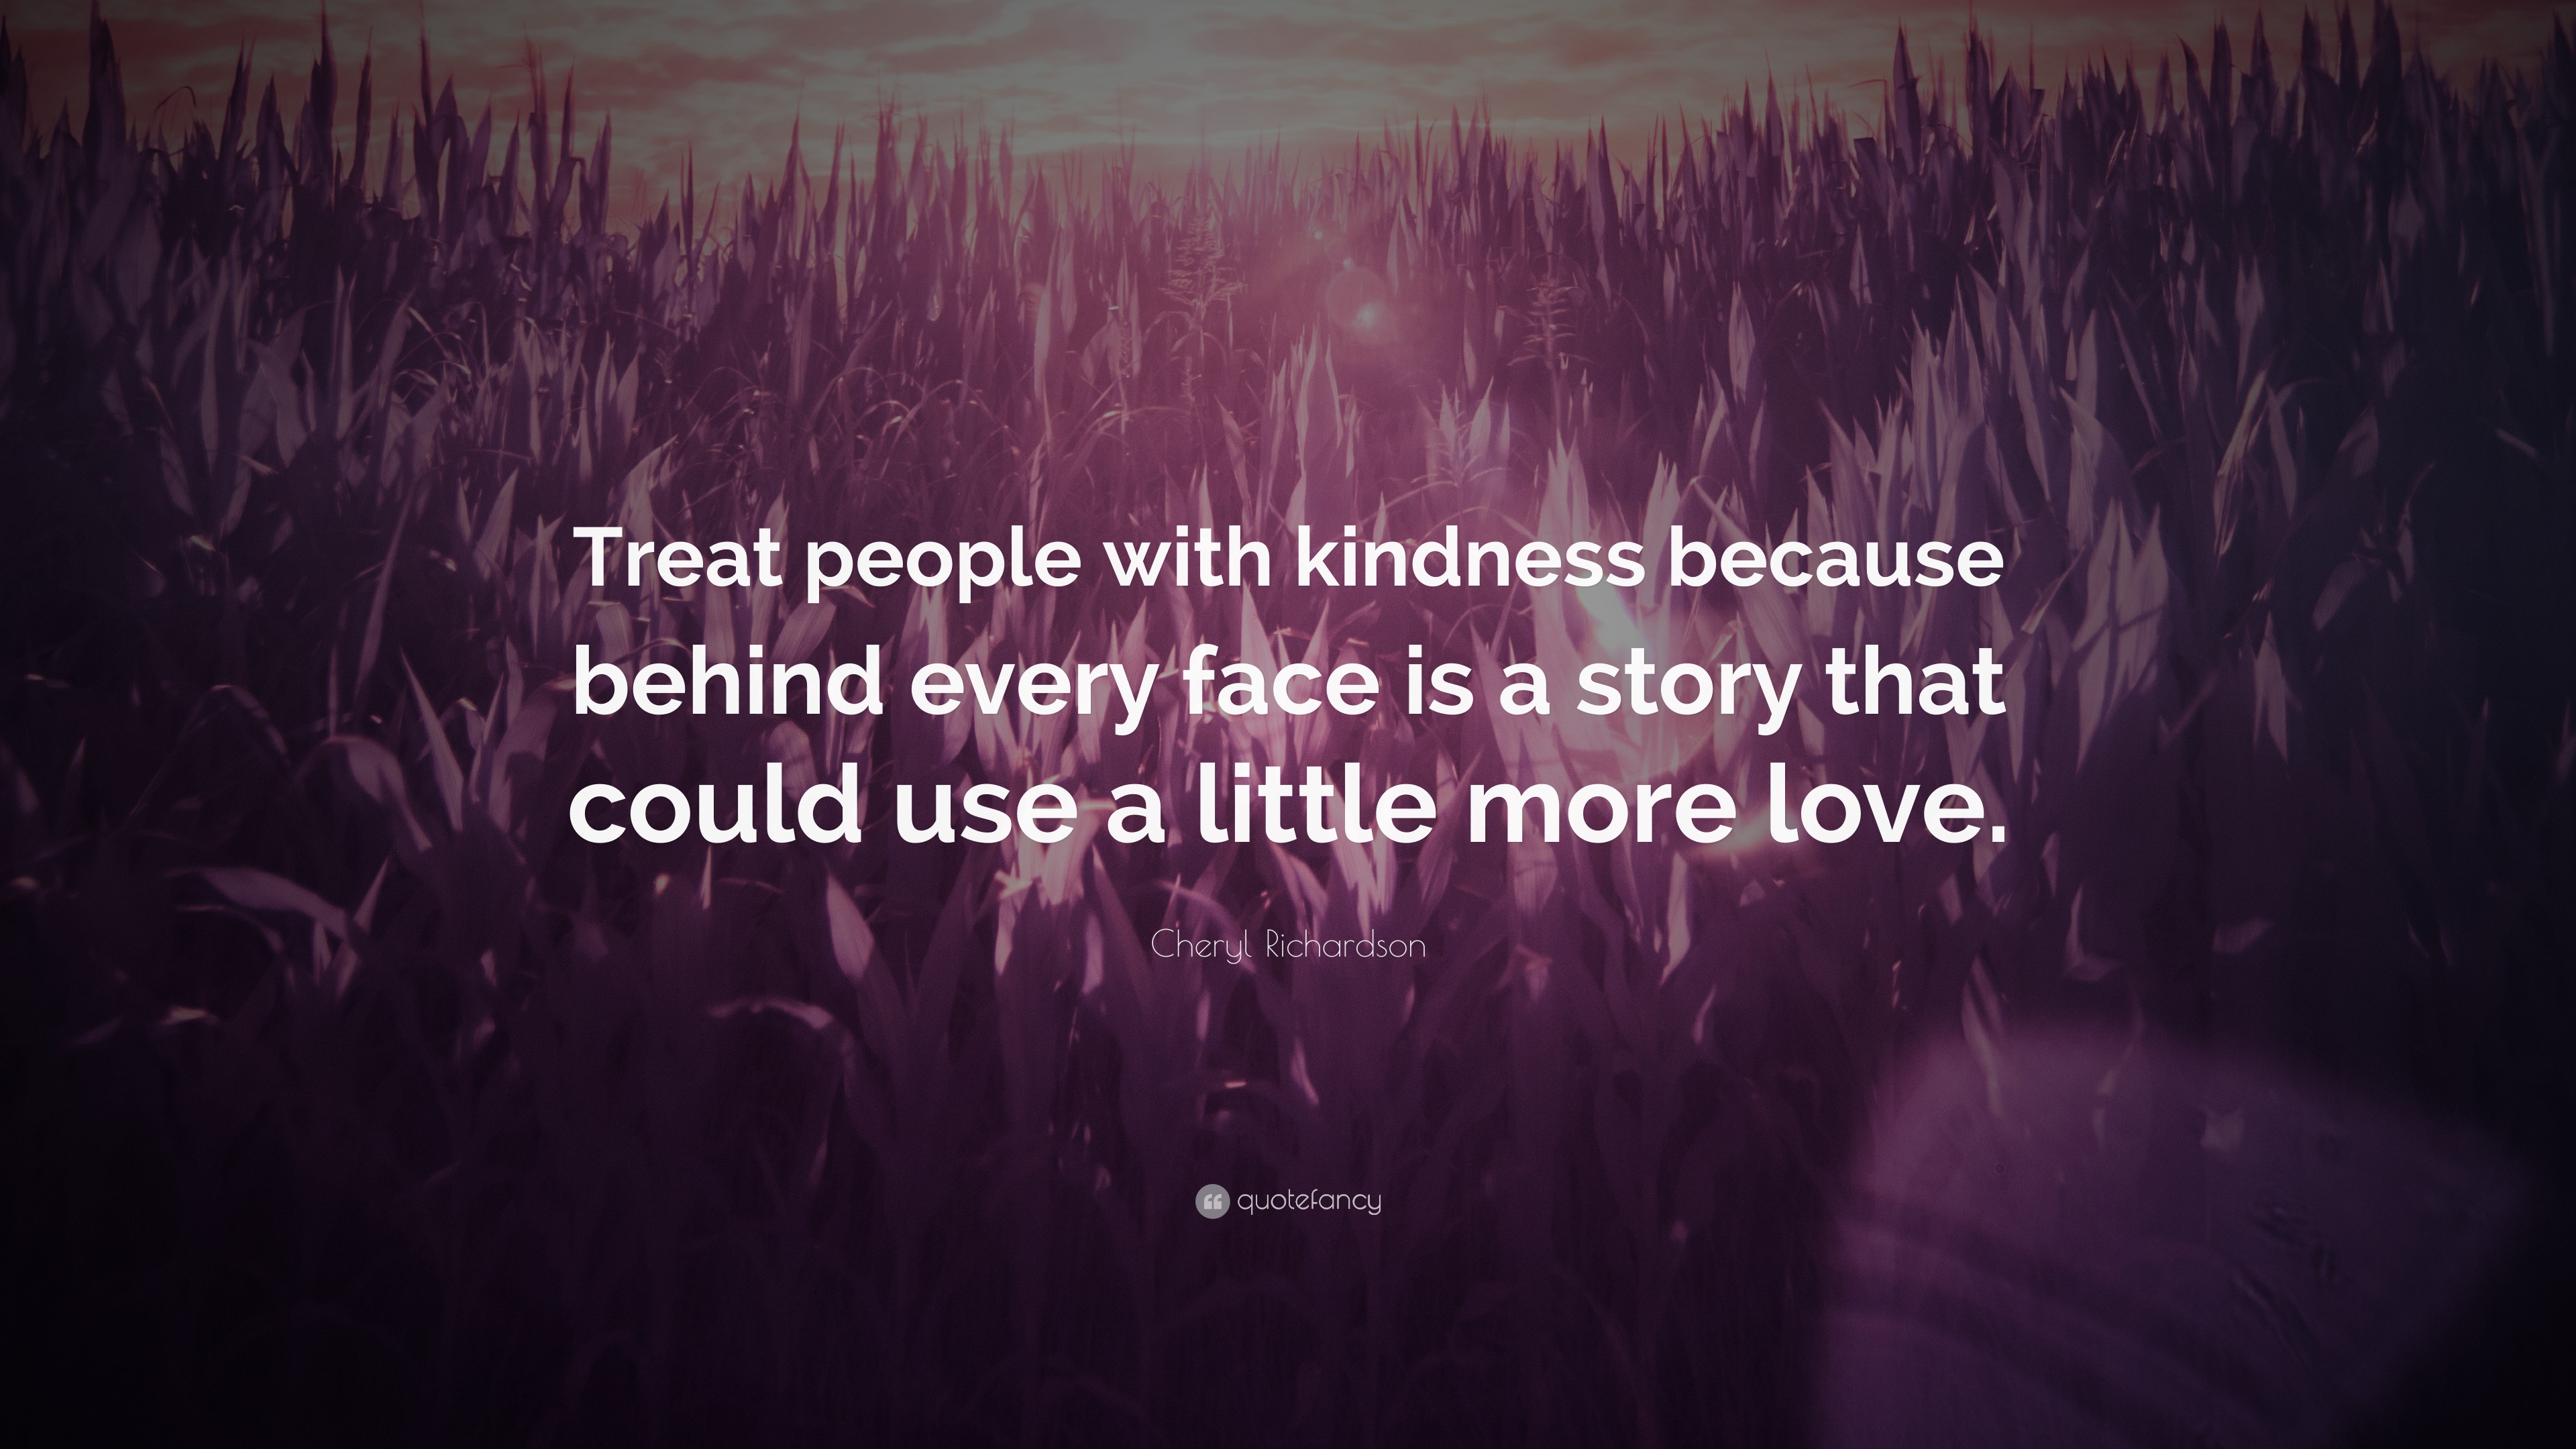 Cheryl Richardson Quote: “Treat people with kindness because behind ...